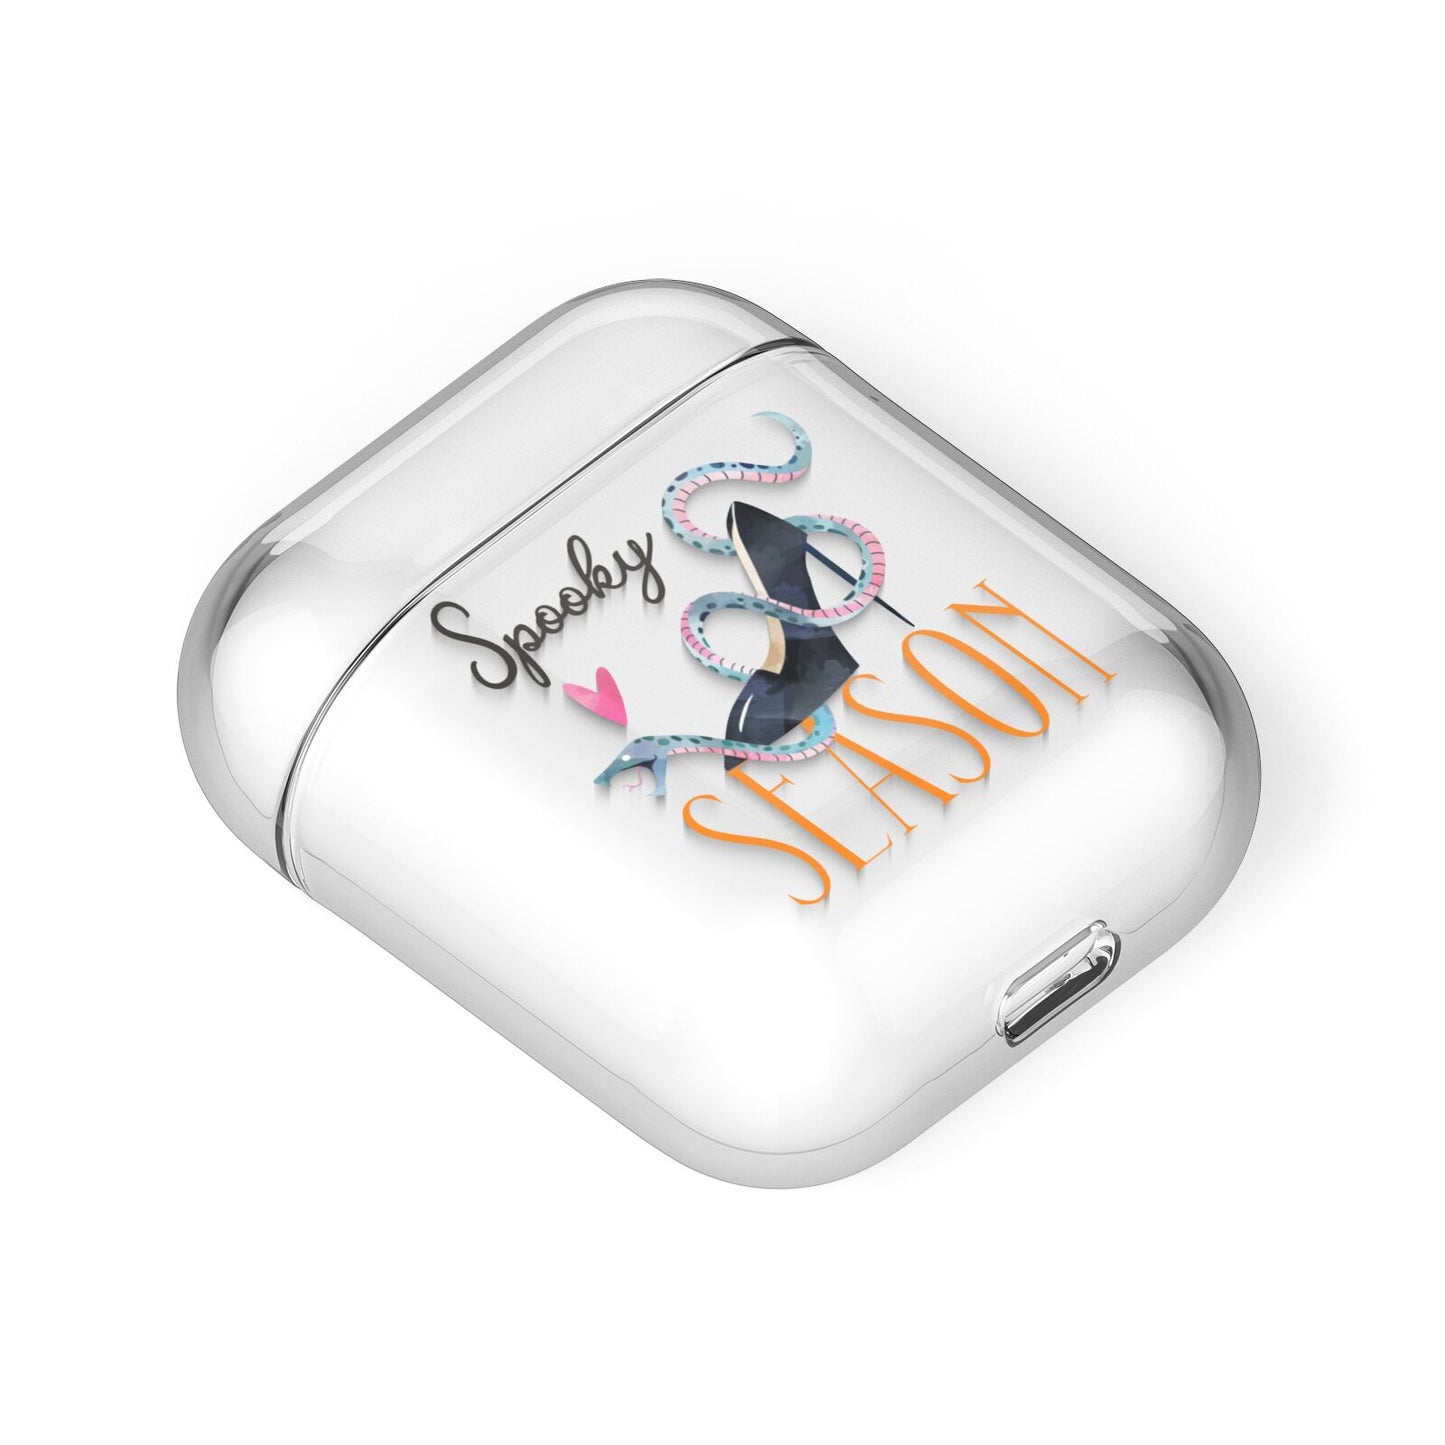 Fun Halloween Catchphrases and Watercolour Illustrations AirPods Case Laid Flat